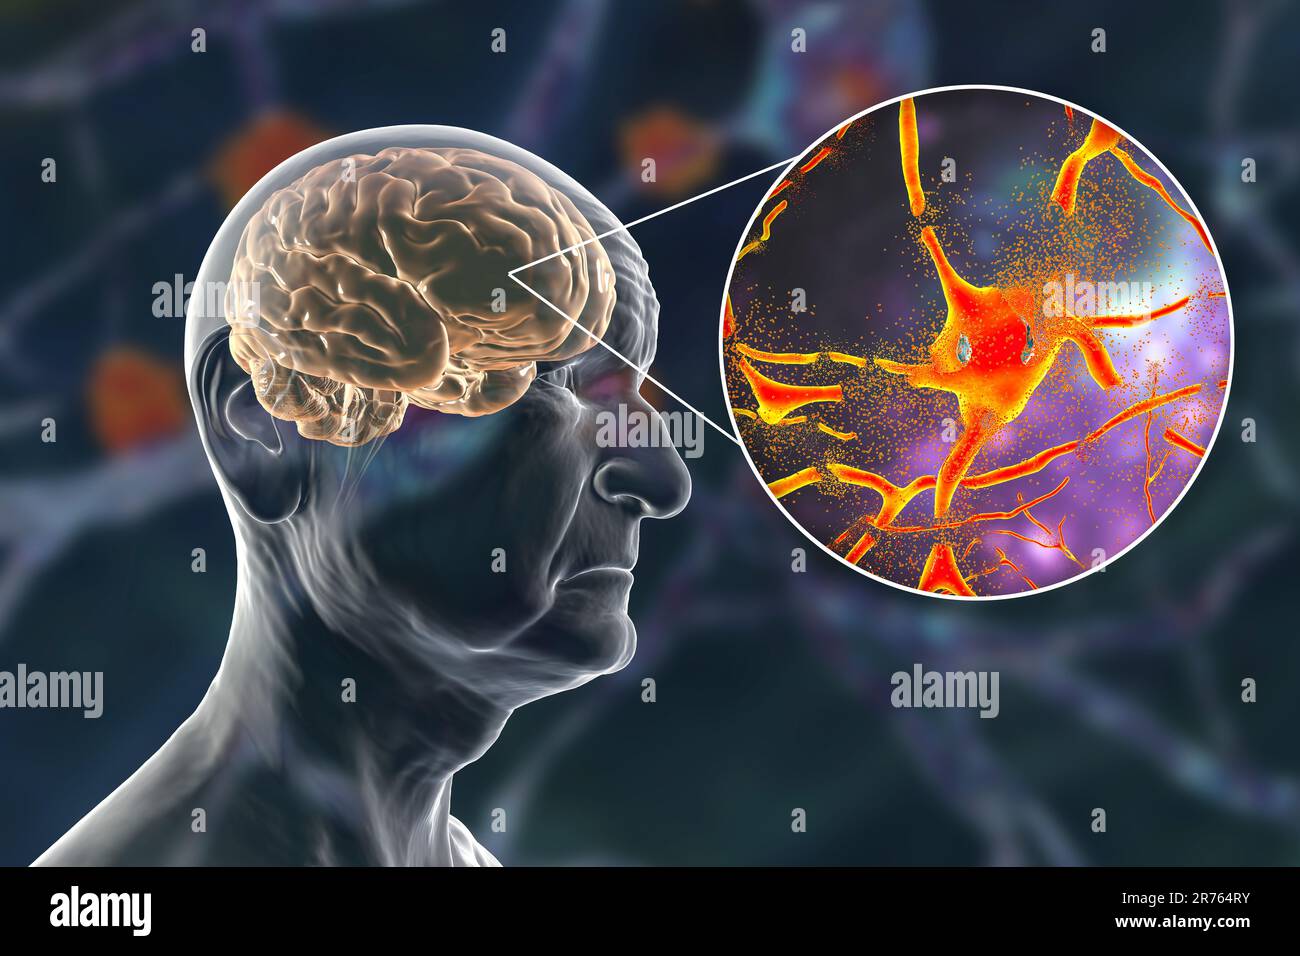 Dementia and Alzheimer's disease, conceptual computer illustration showing neurodegeneration and progressive impairment of brain functions in the elde Stock Photo